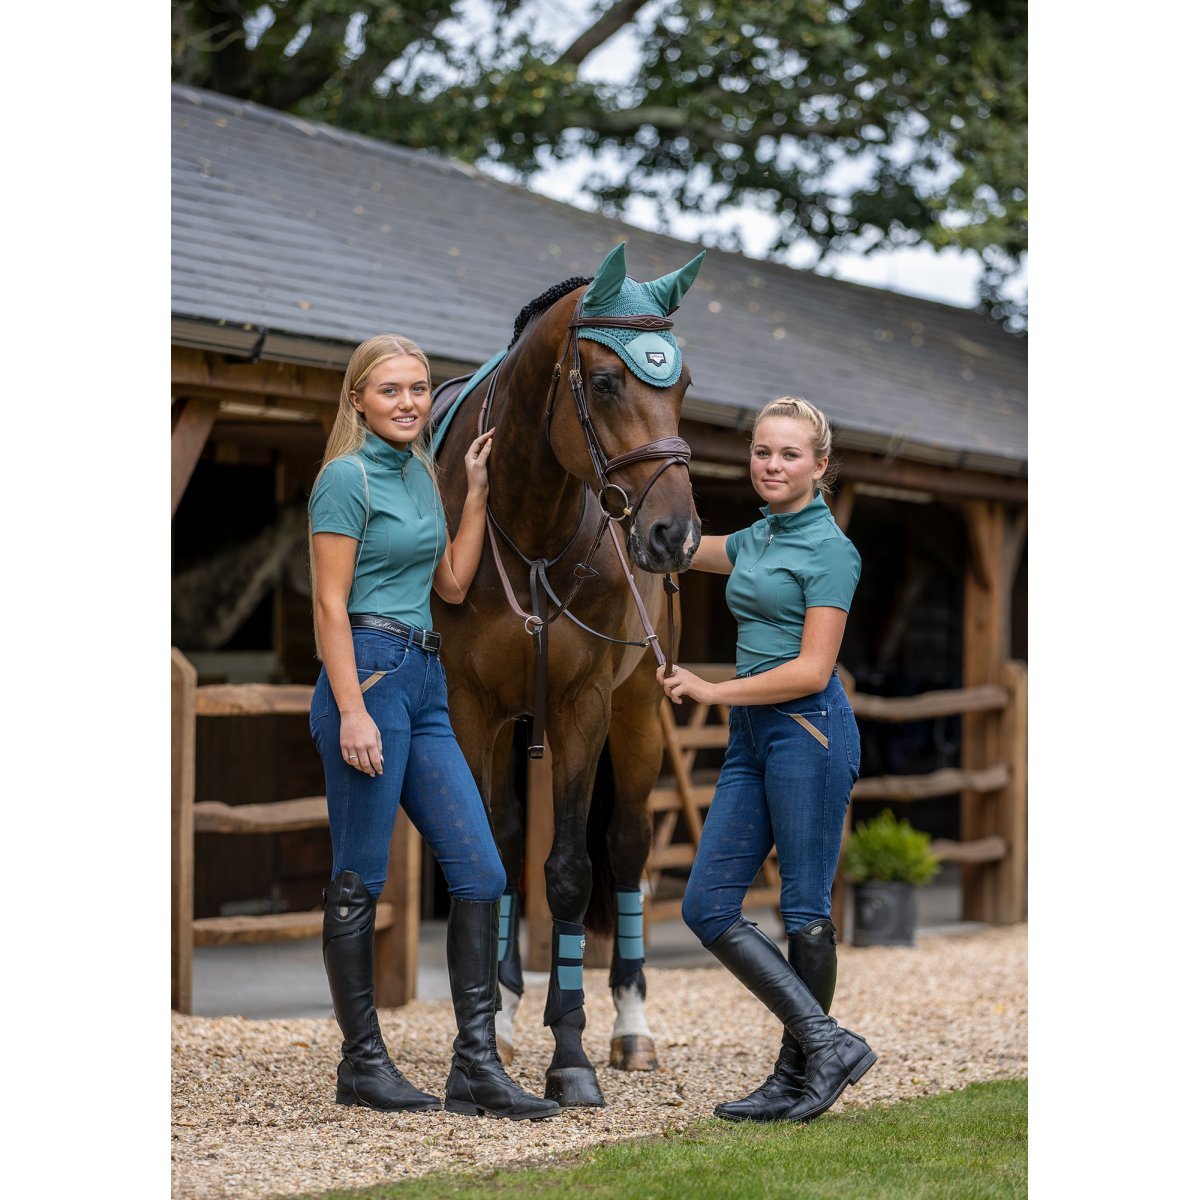 LeMieux Activewear Short Sleeve Base Layer-Southern Sport Horses-The Equestrian